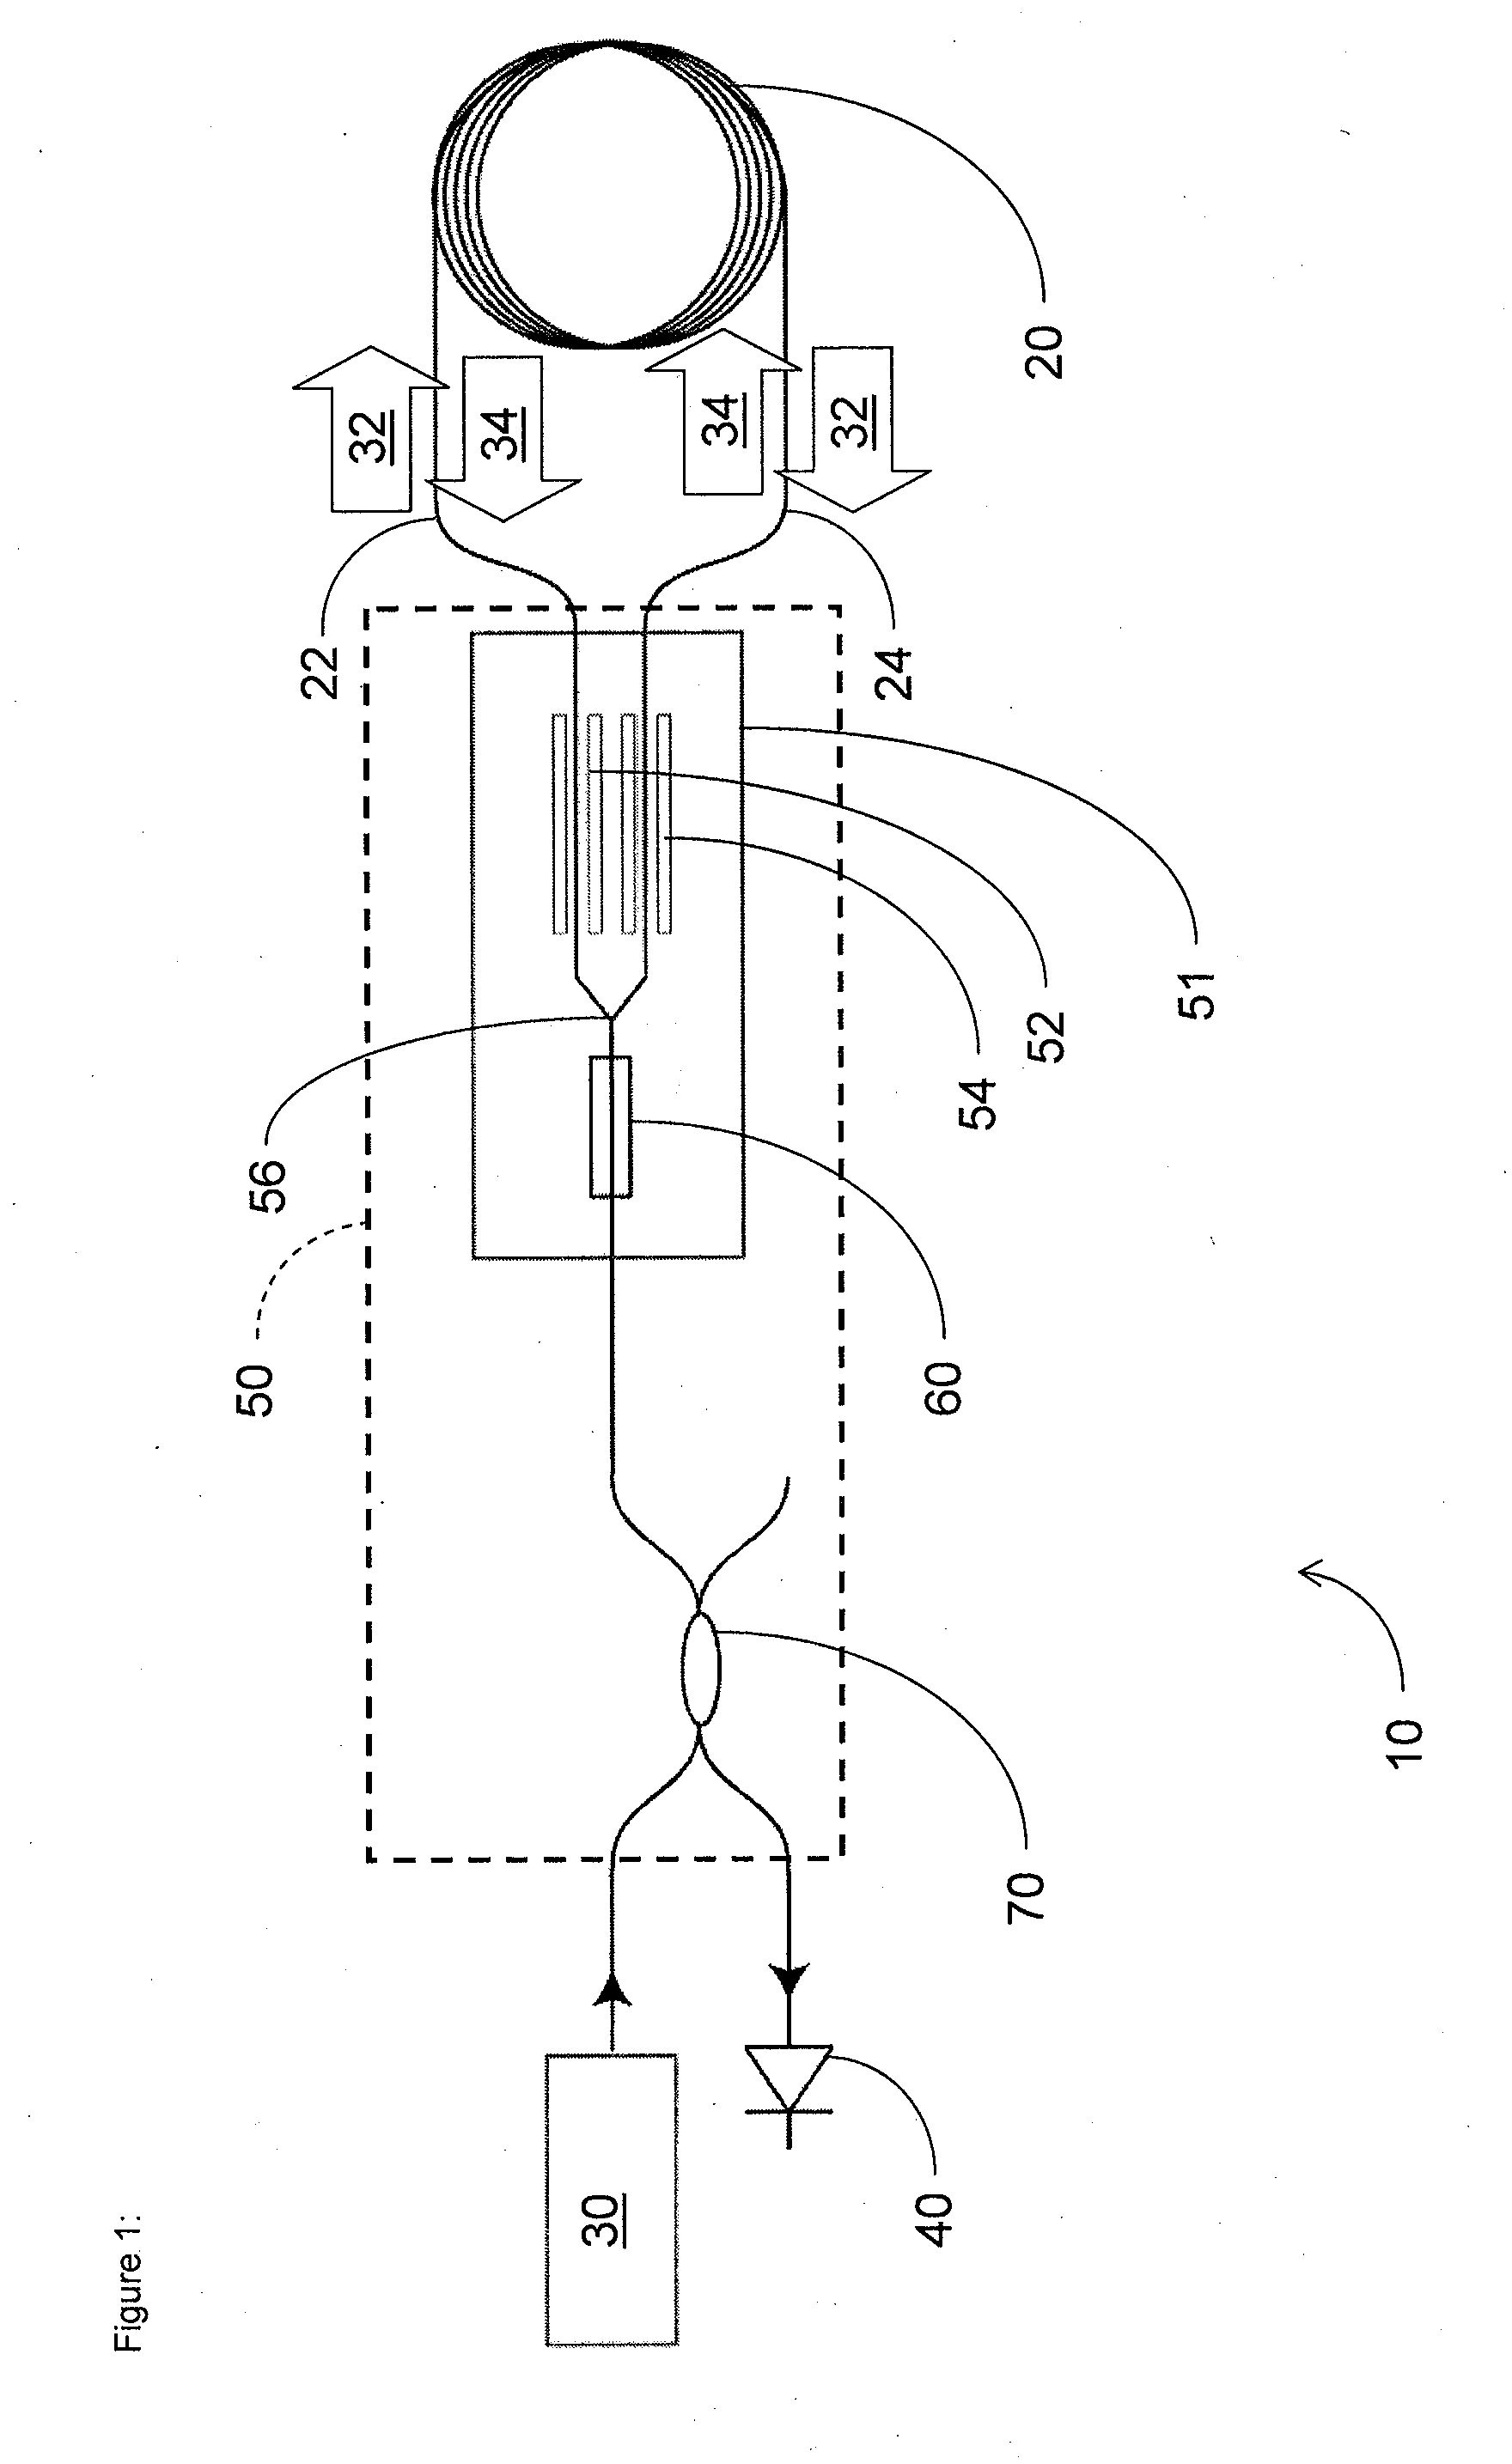 Laser-driven optical gyroscope with push-pull modulation